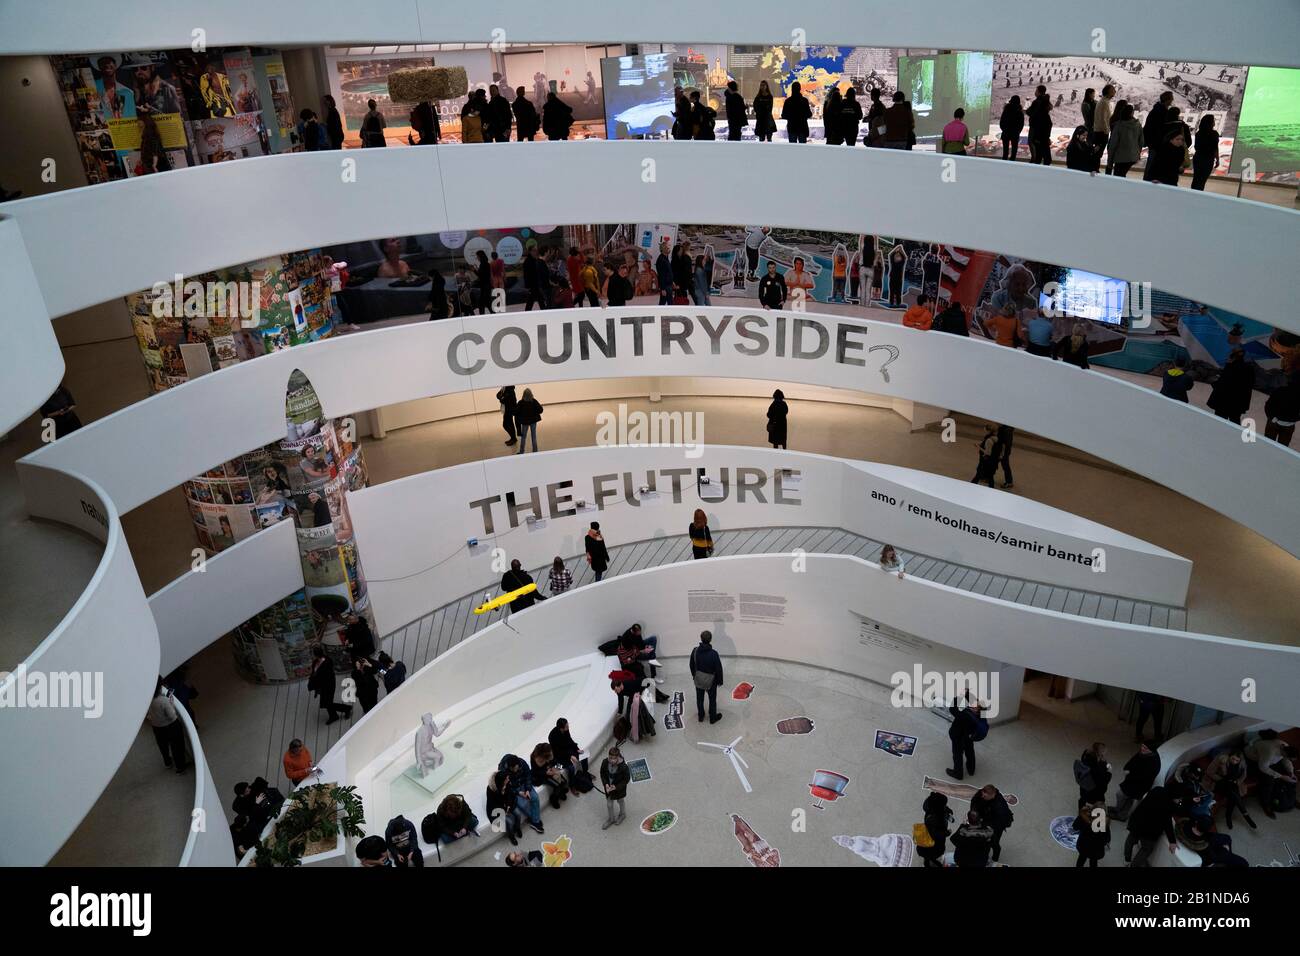 New York, USA. 20th Feb, 2020. Visitors look at exhibits at the 'Countryside, The Future' exhibition in New York, the United States, on Feb. 20, 2020. An on-going exhibition presented by renowned Dutch architect Rem Koolhaas in New York City highlights how China has been dramatically redefining its vast countryside with continuous investment in infrastructure and poverty alleviation. Credit: Wang Ying/Xinhua/Alamy Live News Stock Photo